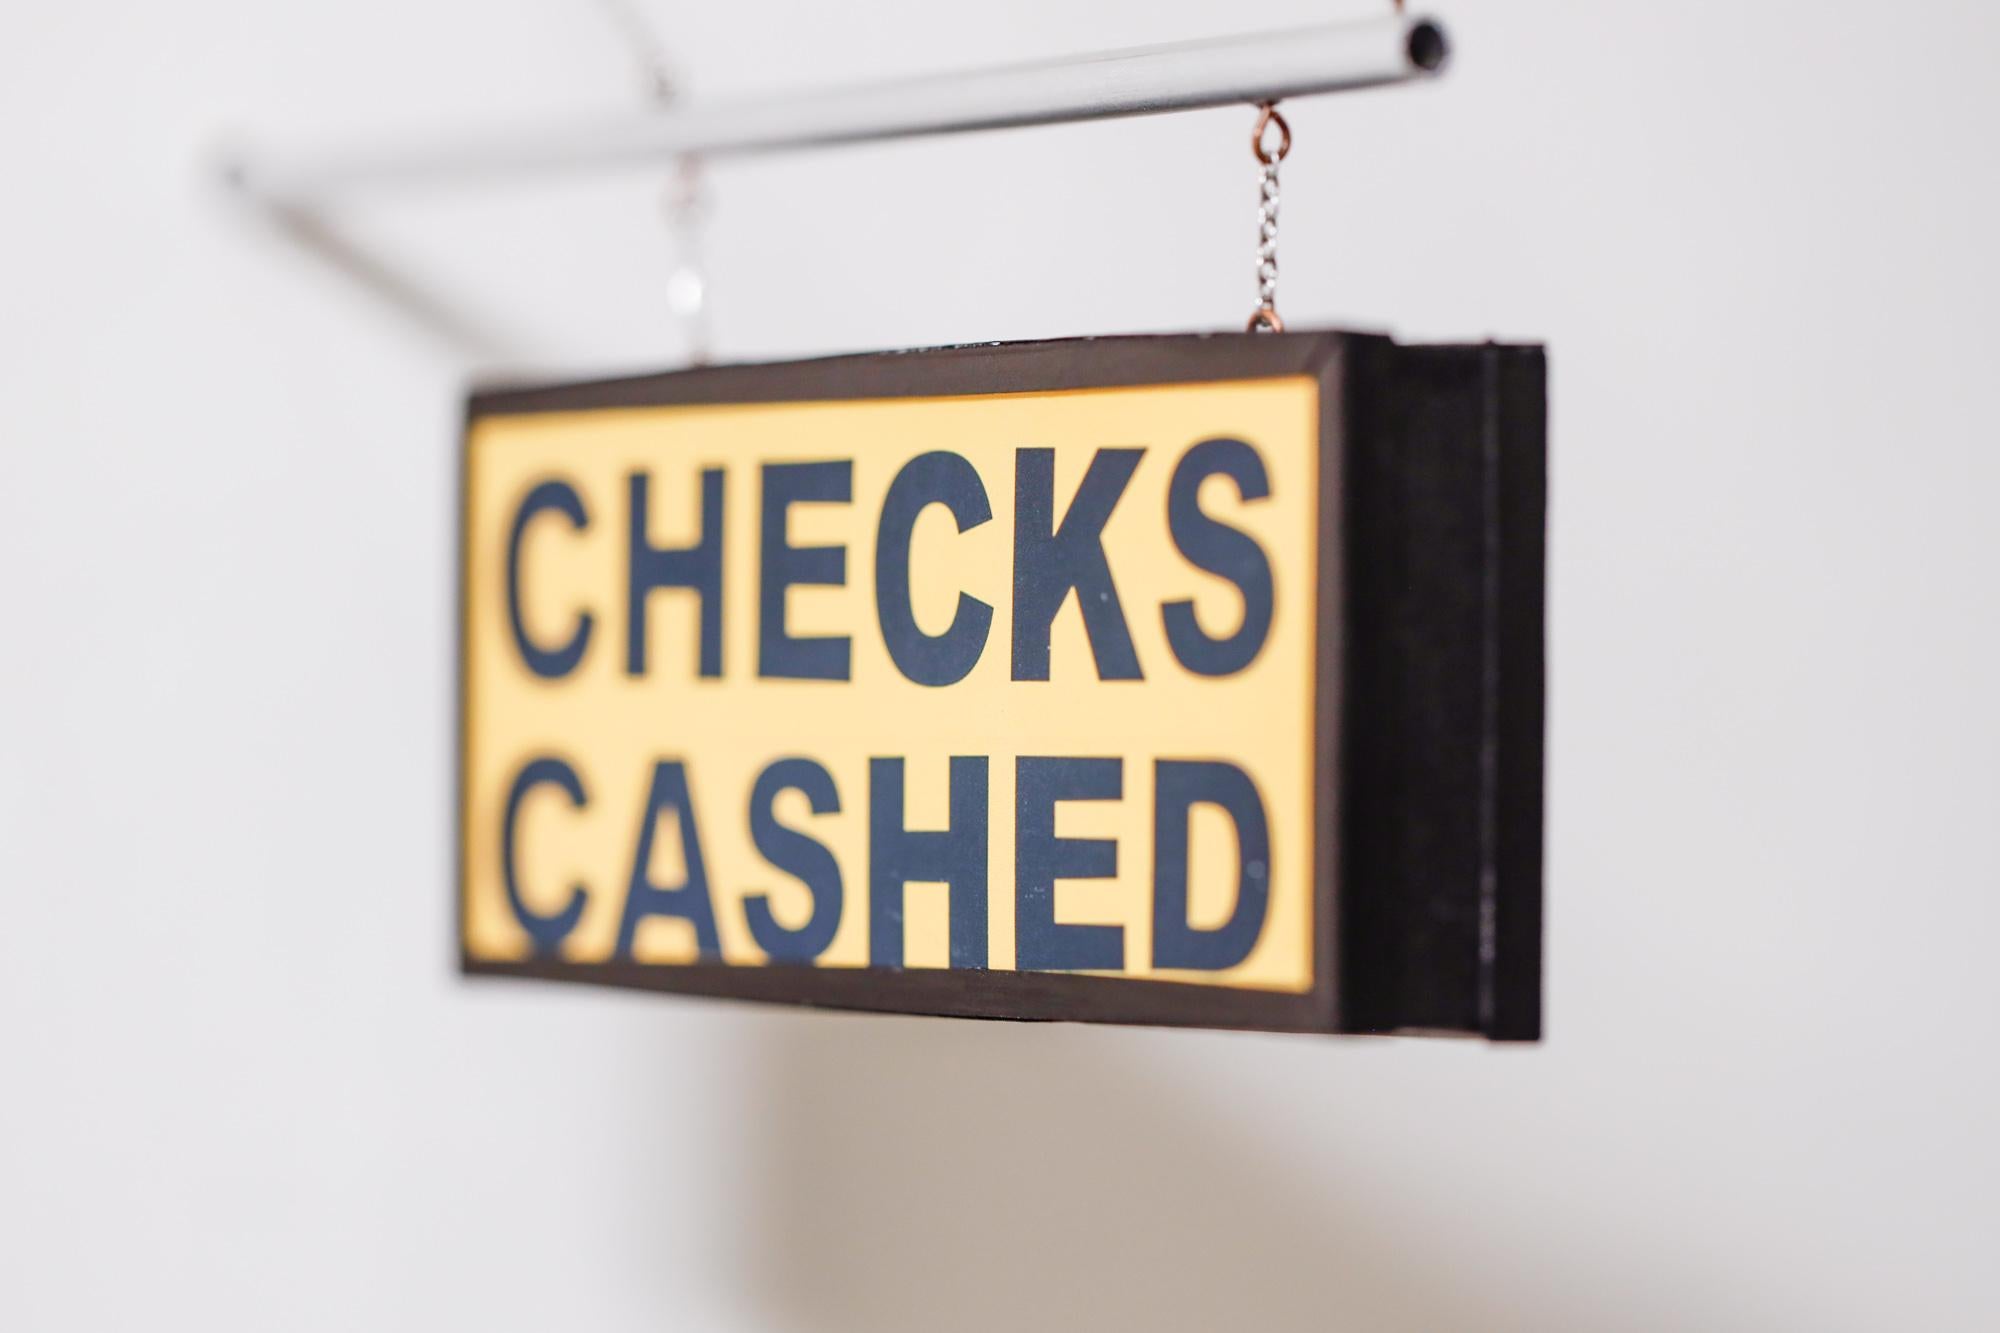 Cash Checked - Contemporary Sculpture by Drew Leshko